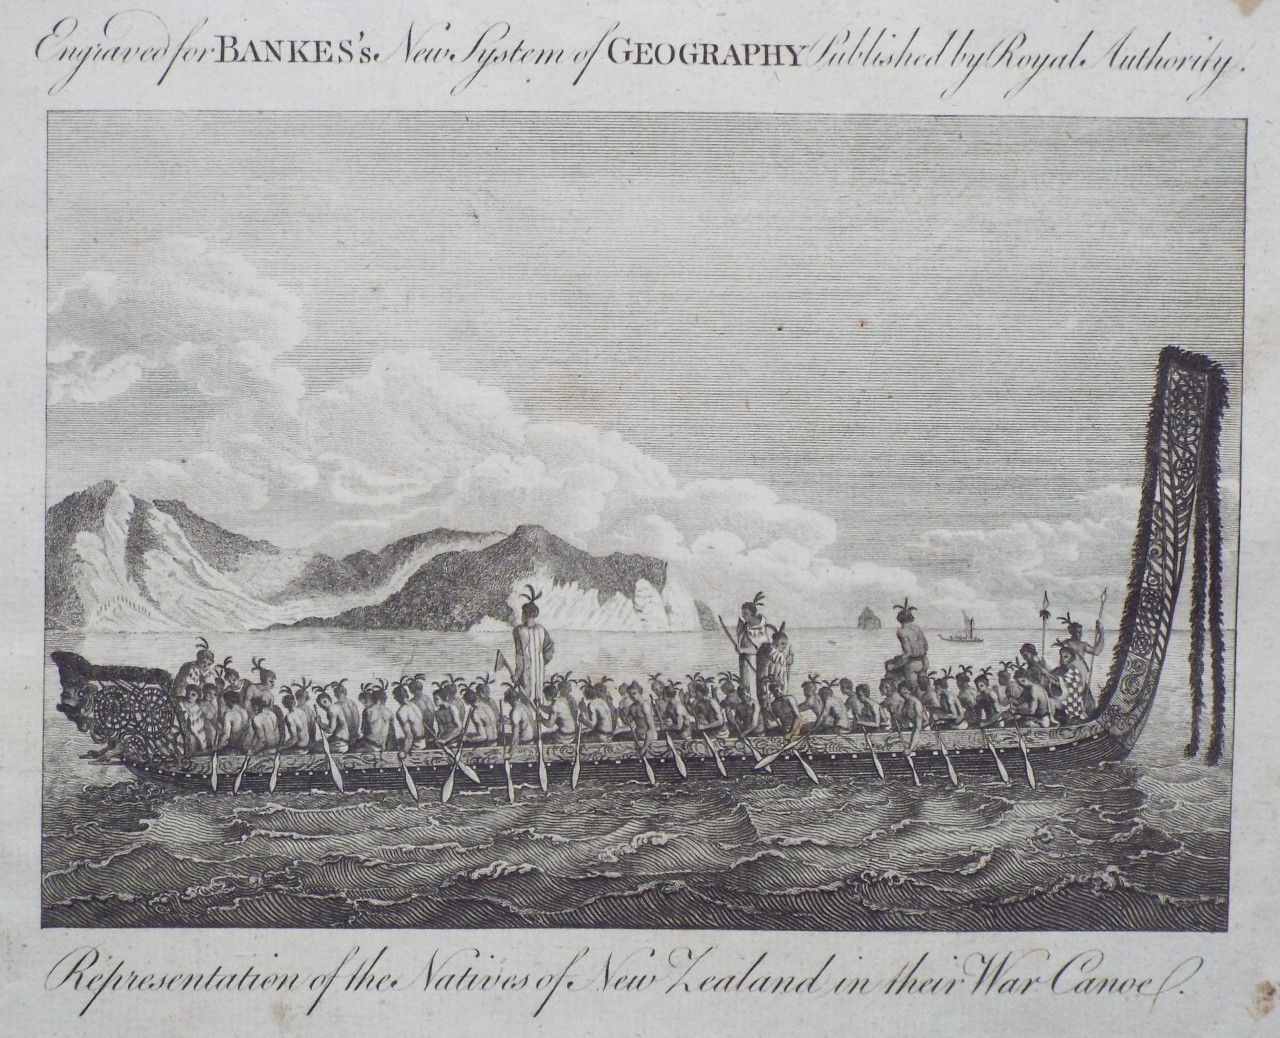 Print - Representation of the Natives of New Zealand in their War Canoe.